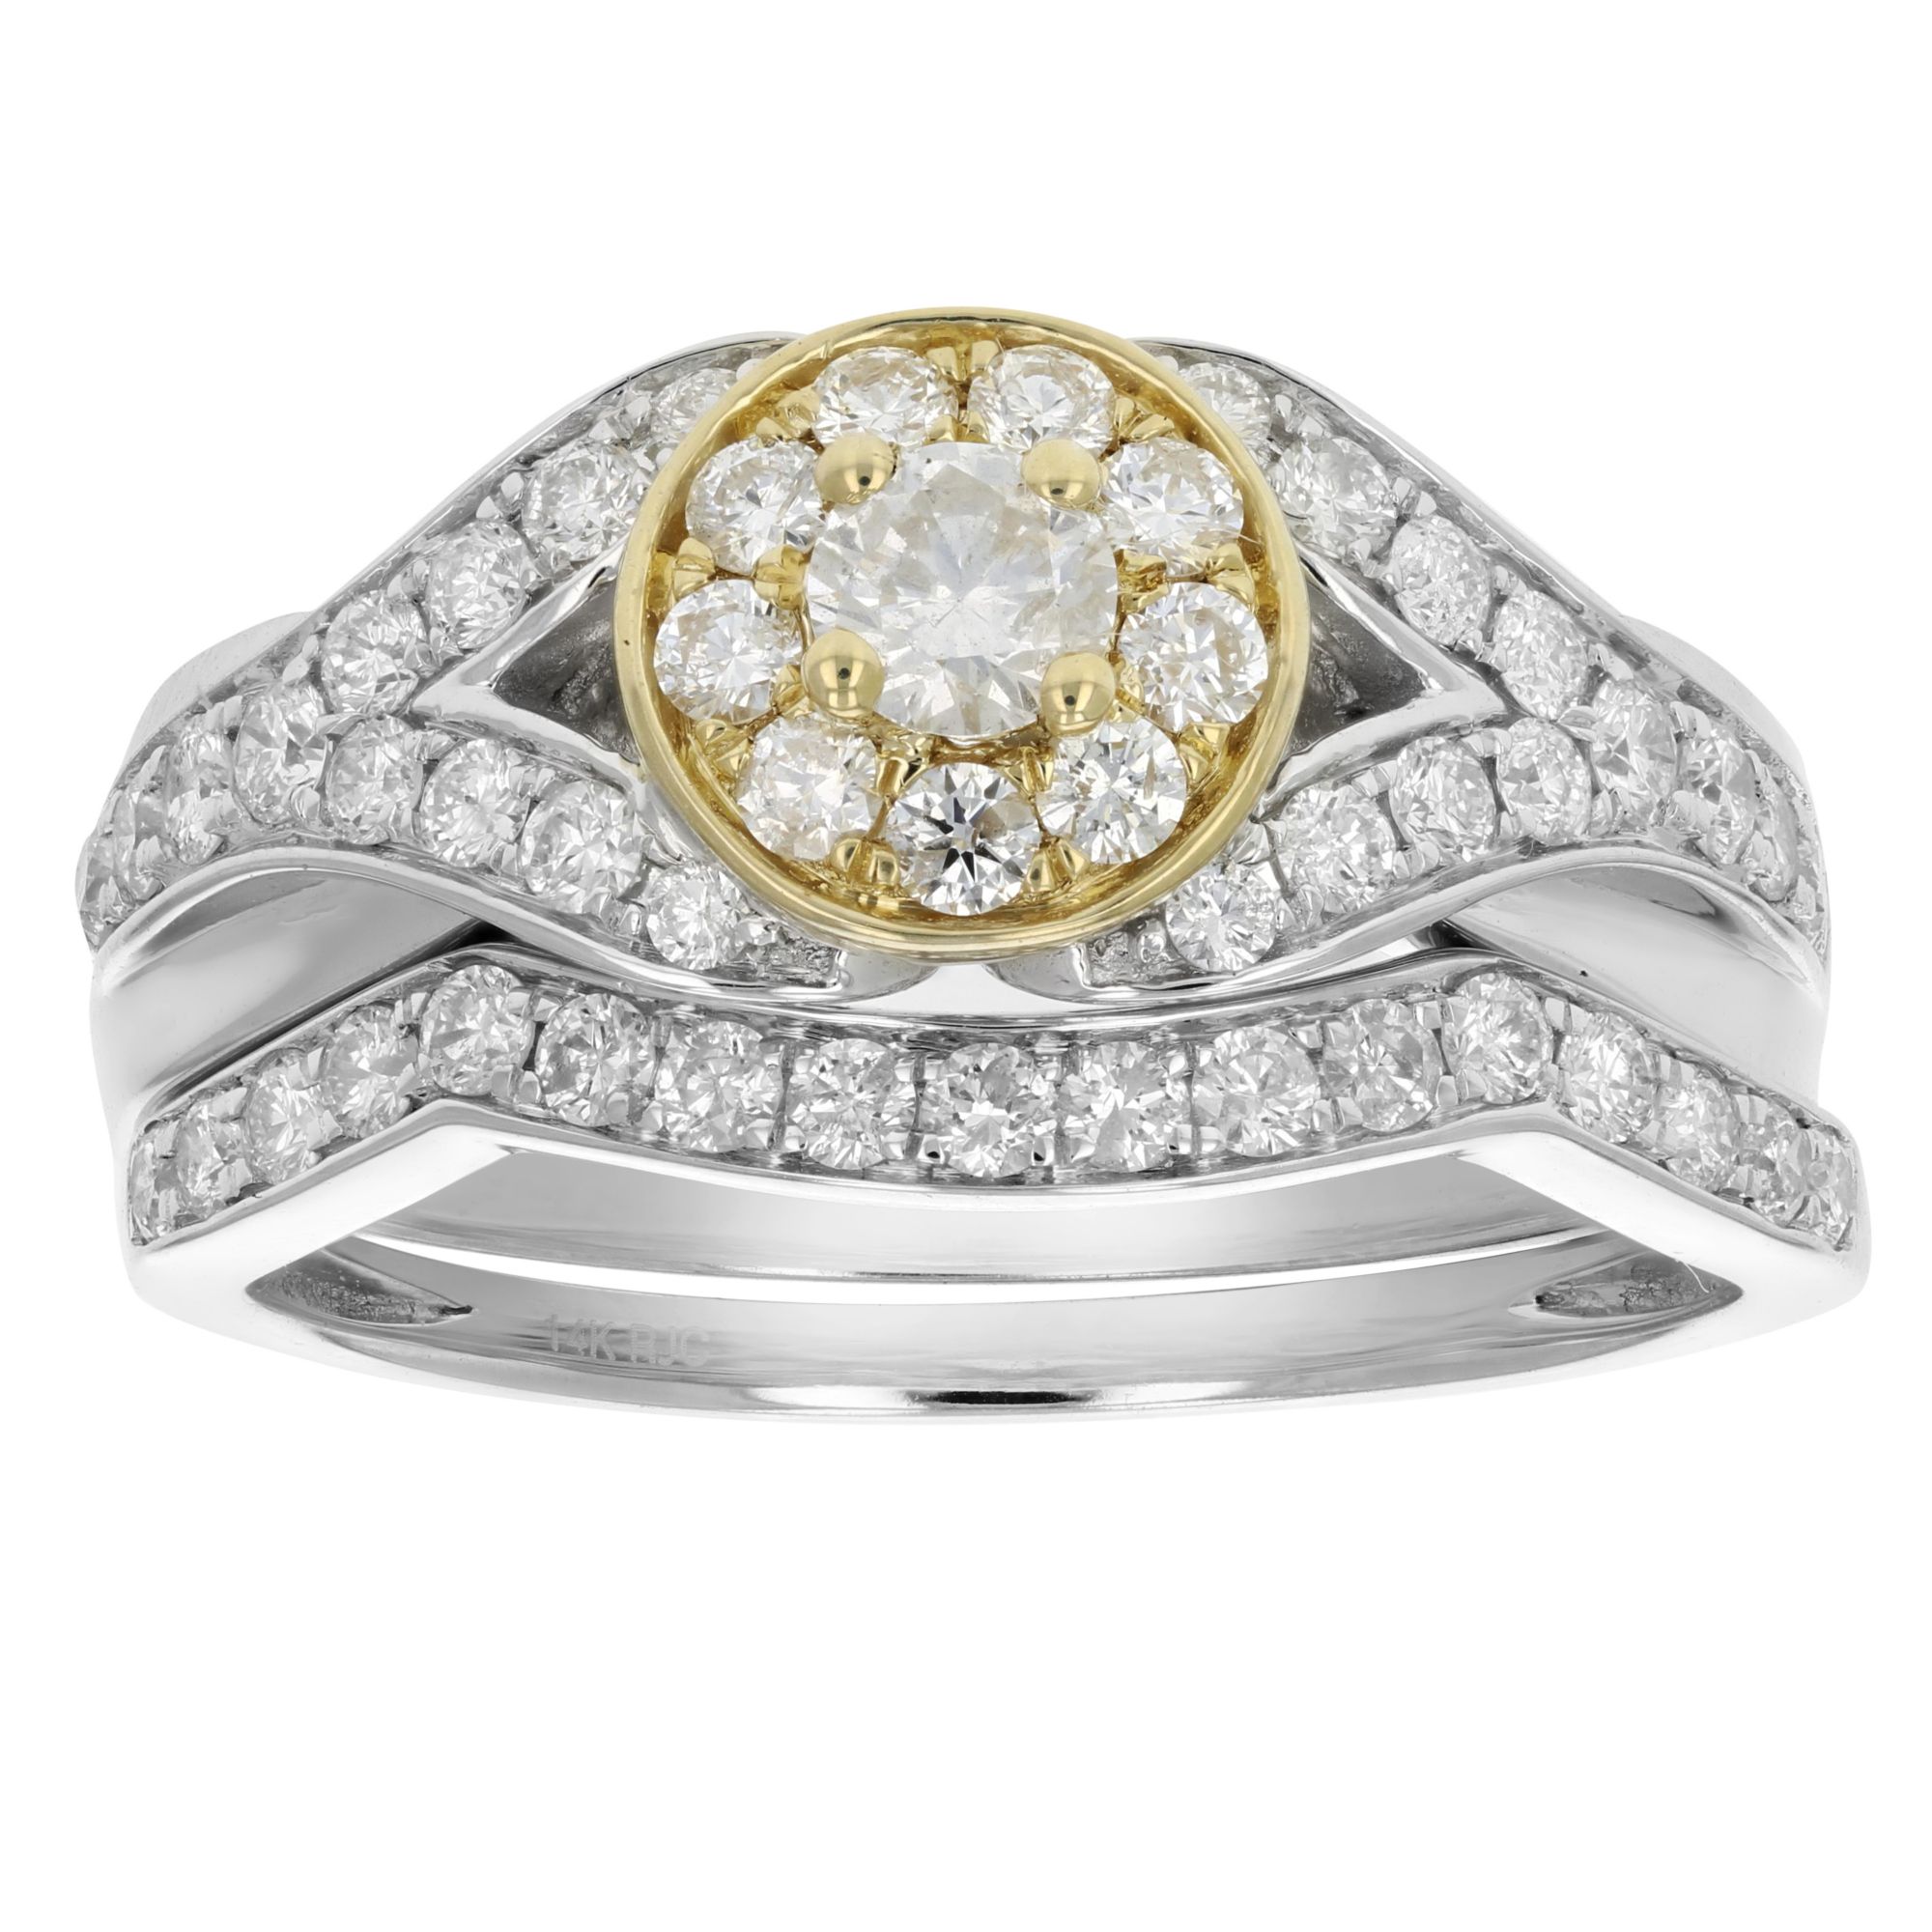 Amairah 1.00 ct. t.w. Diamond Engagement Bridal Ring Set in 14k Two-Tone Gold, Size 5